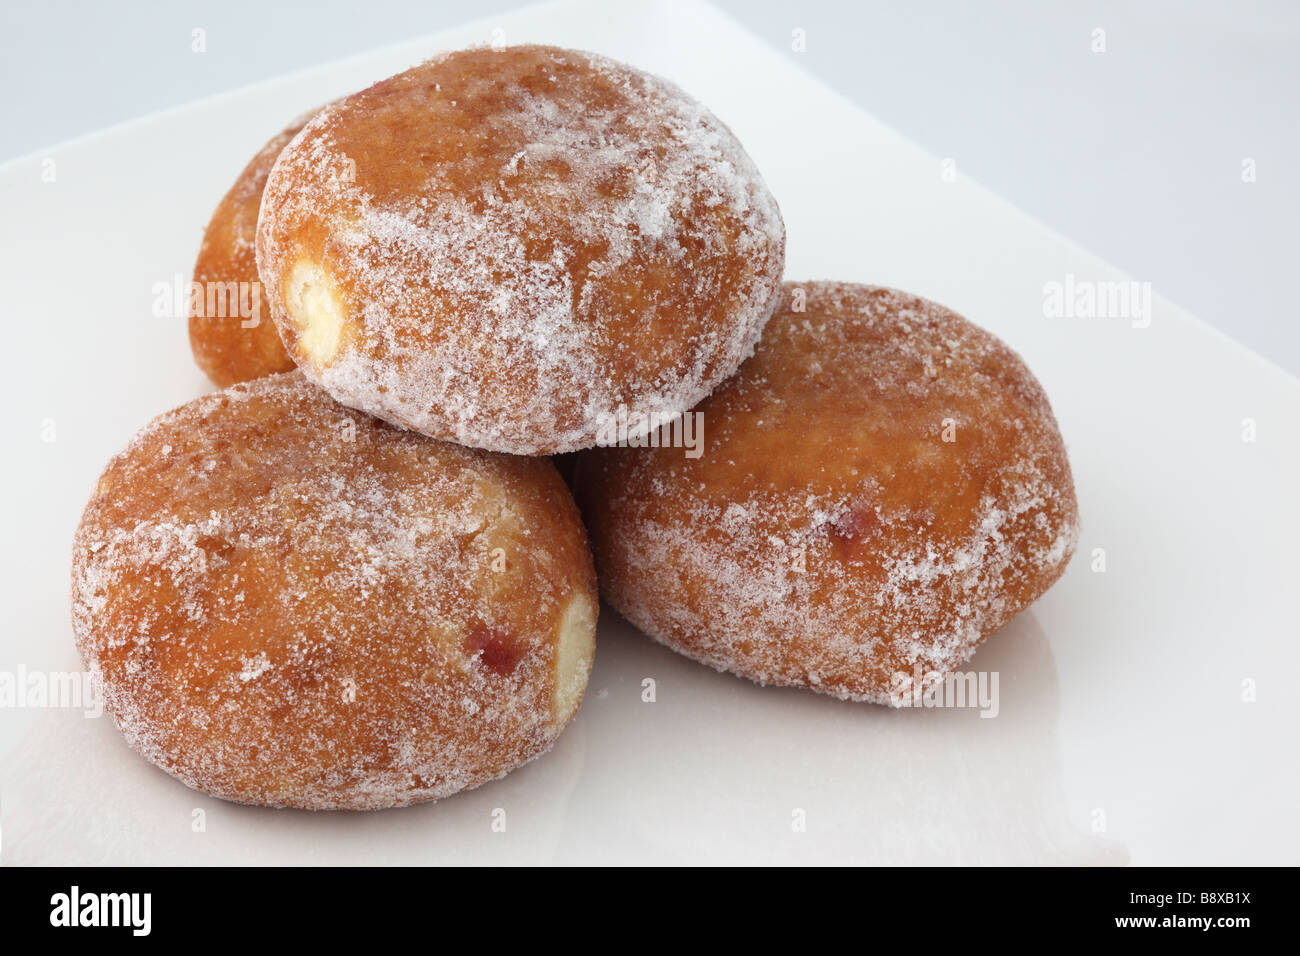 Close up of four fresh sugared jam doughnuts against a white background Stock Photo